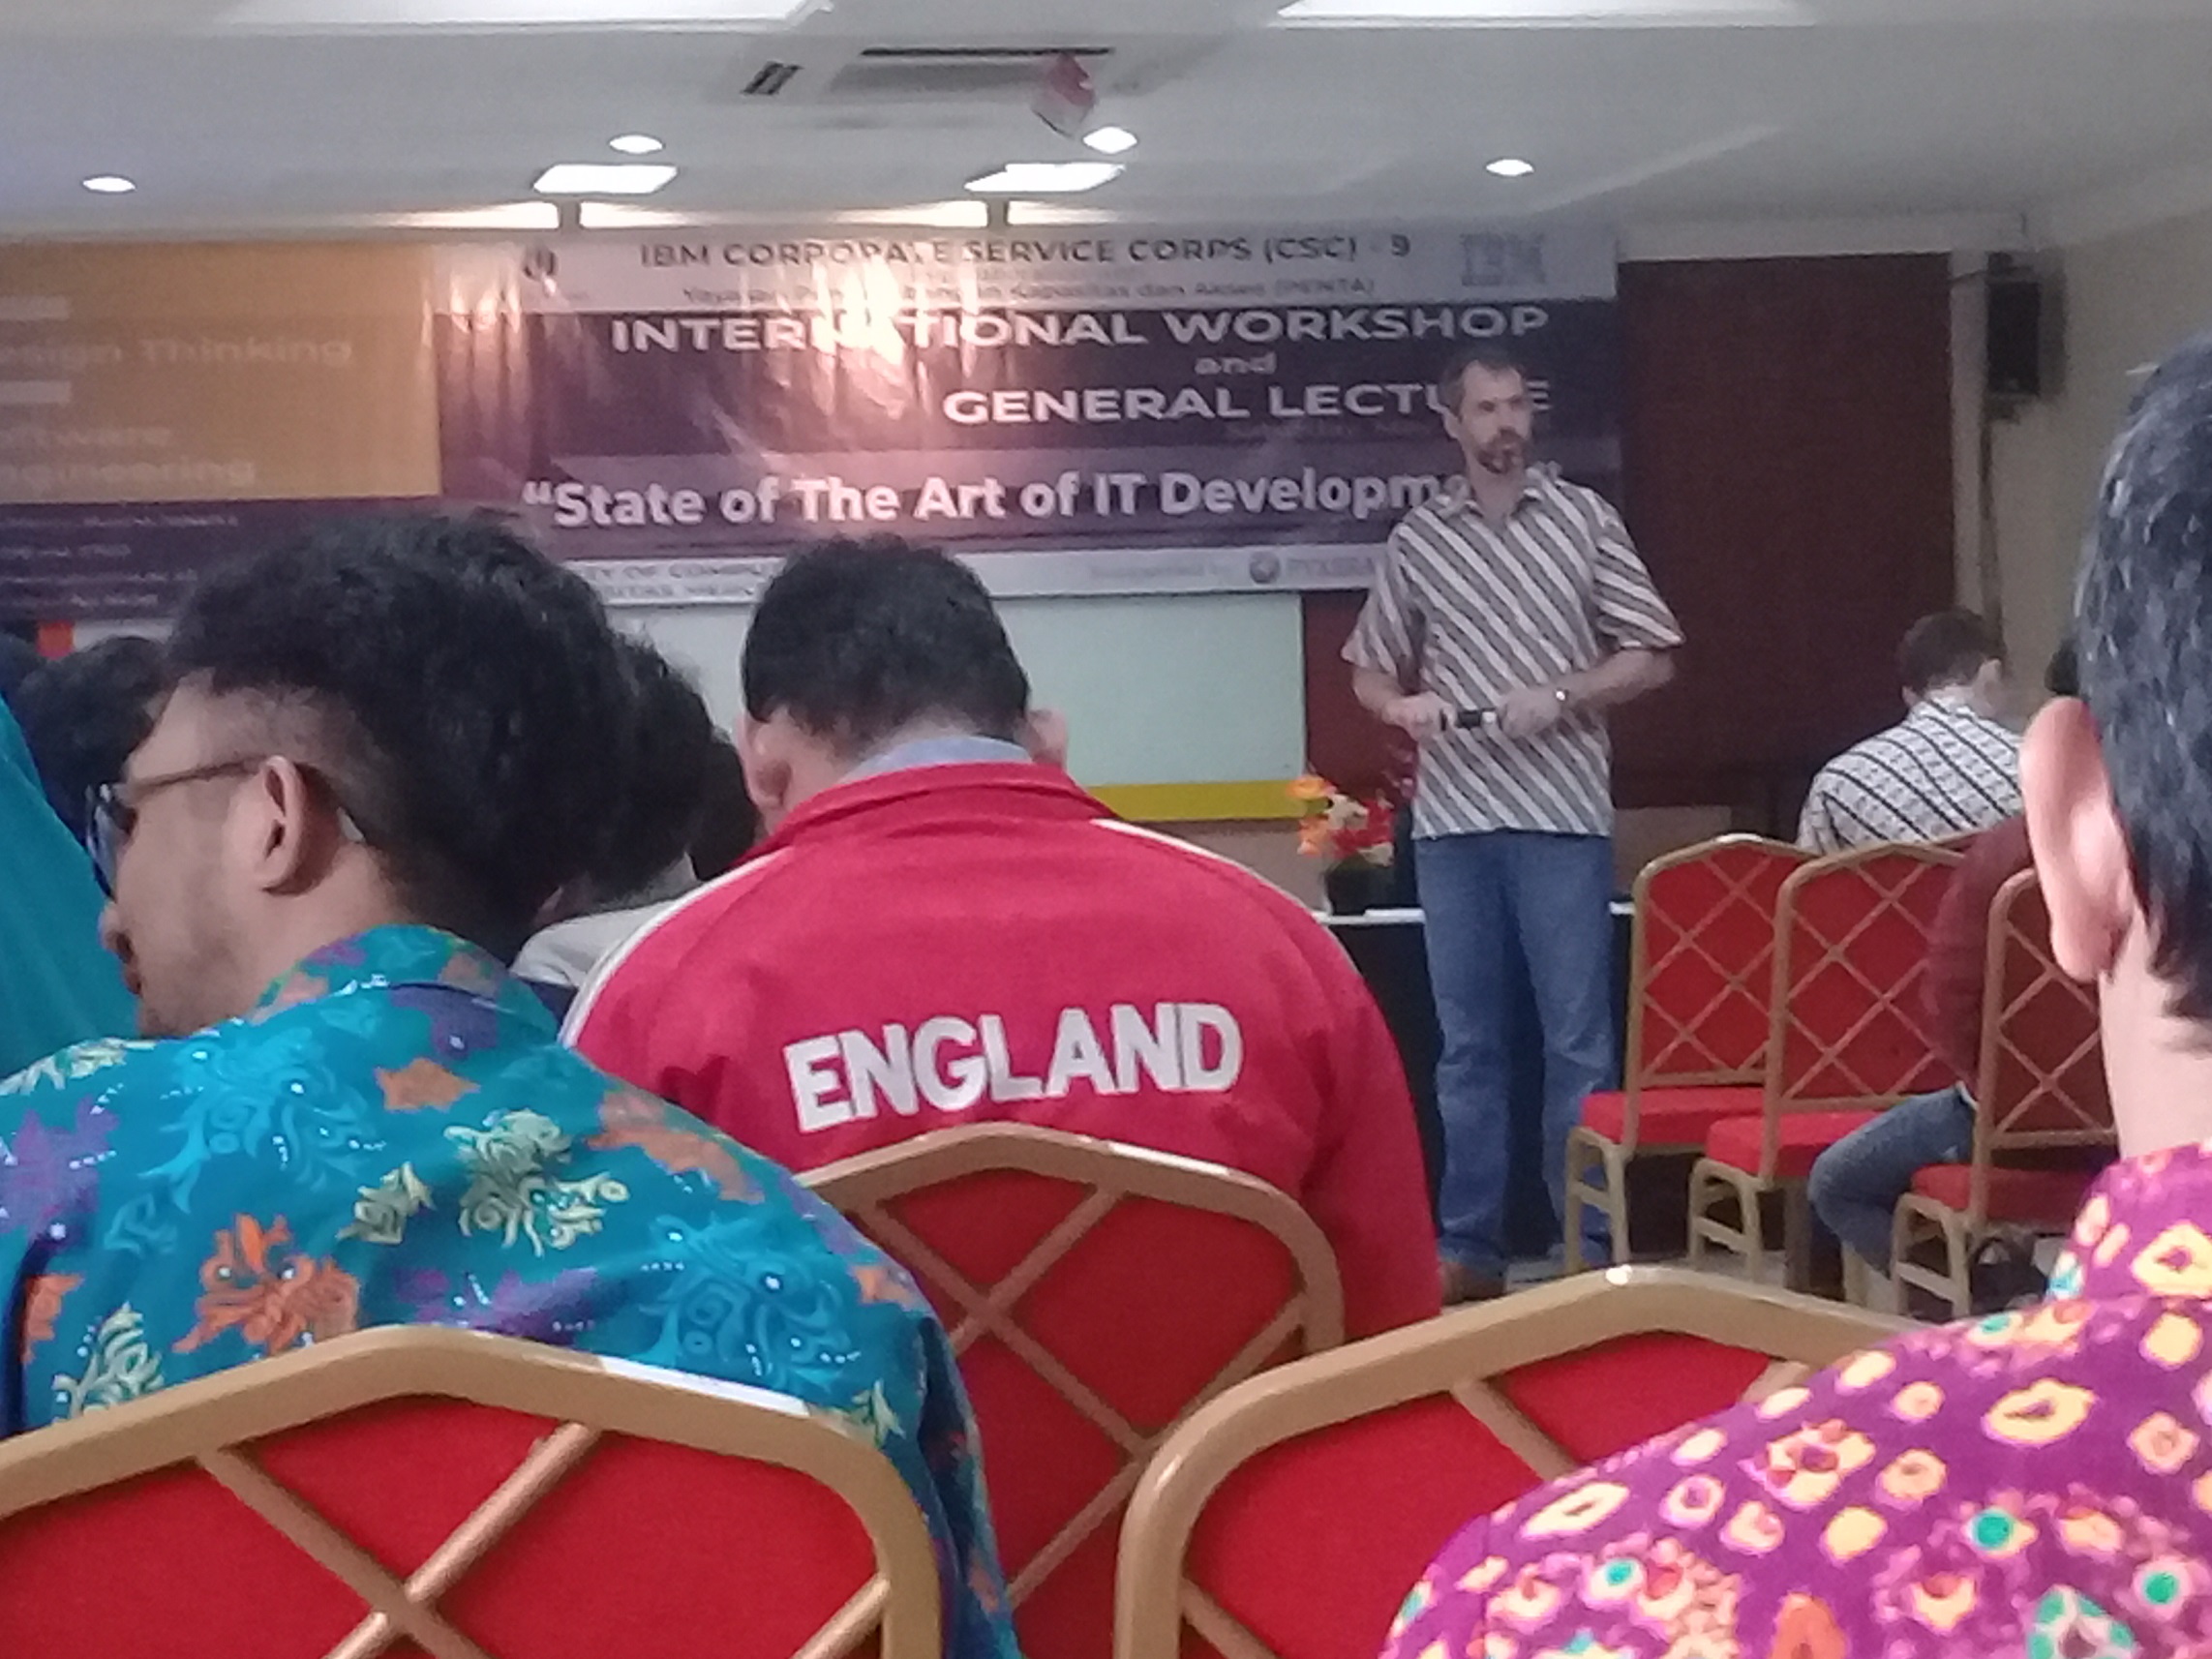 International Workshop and General Lecture